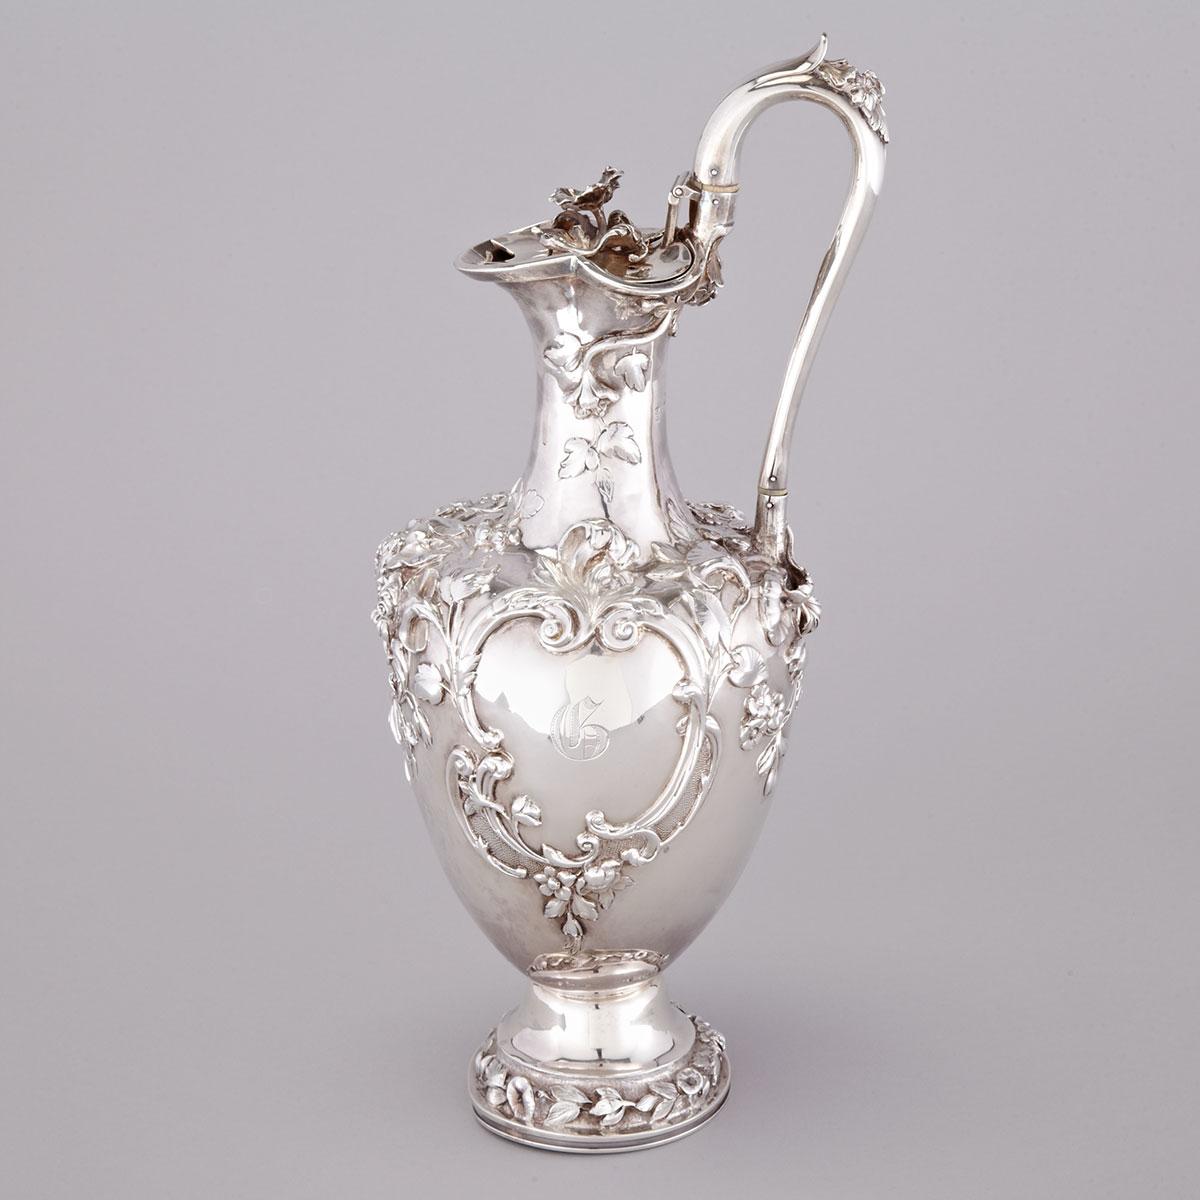 Victorian Silver Large Hot Water Jug, Charles Reily & George Storer, London, 1840